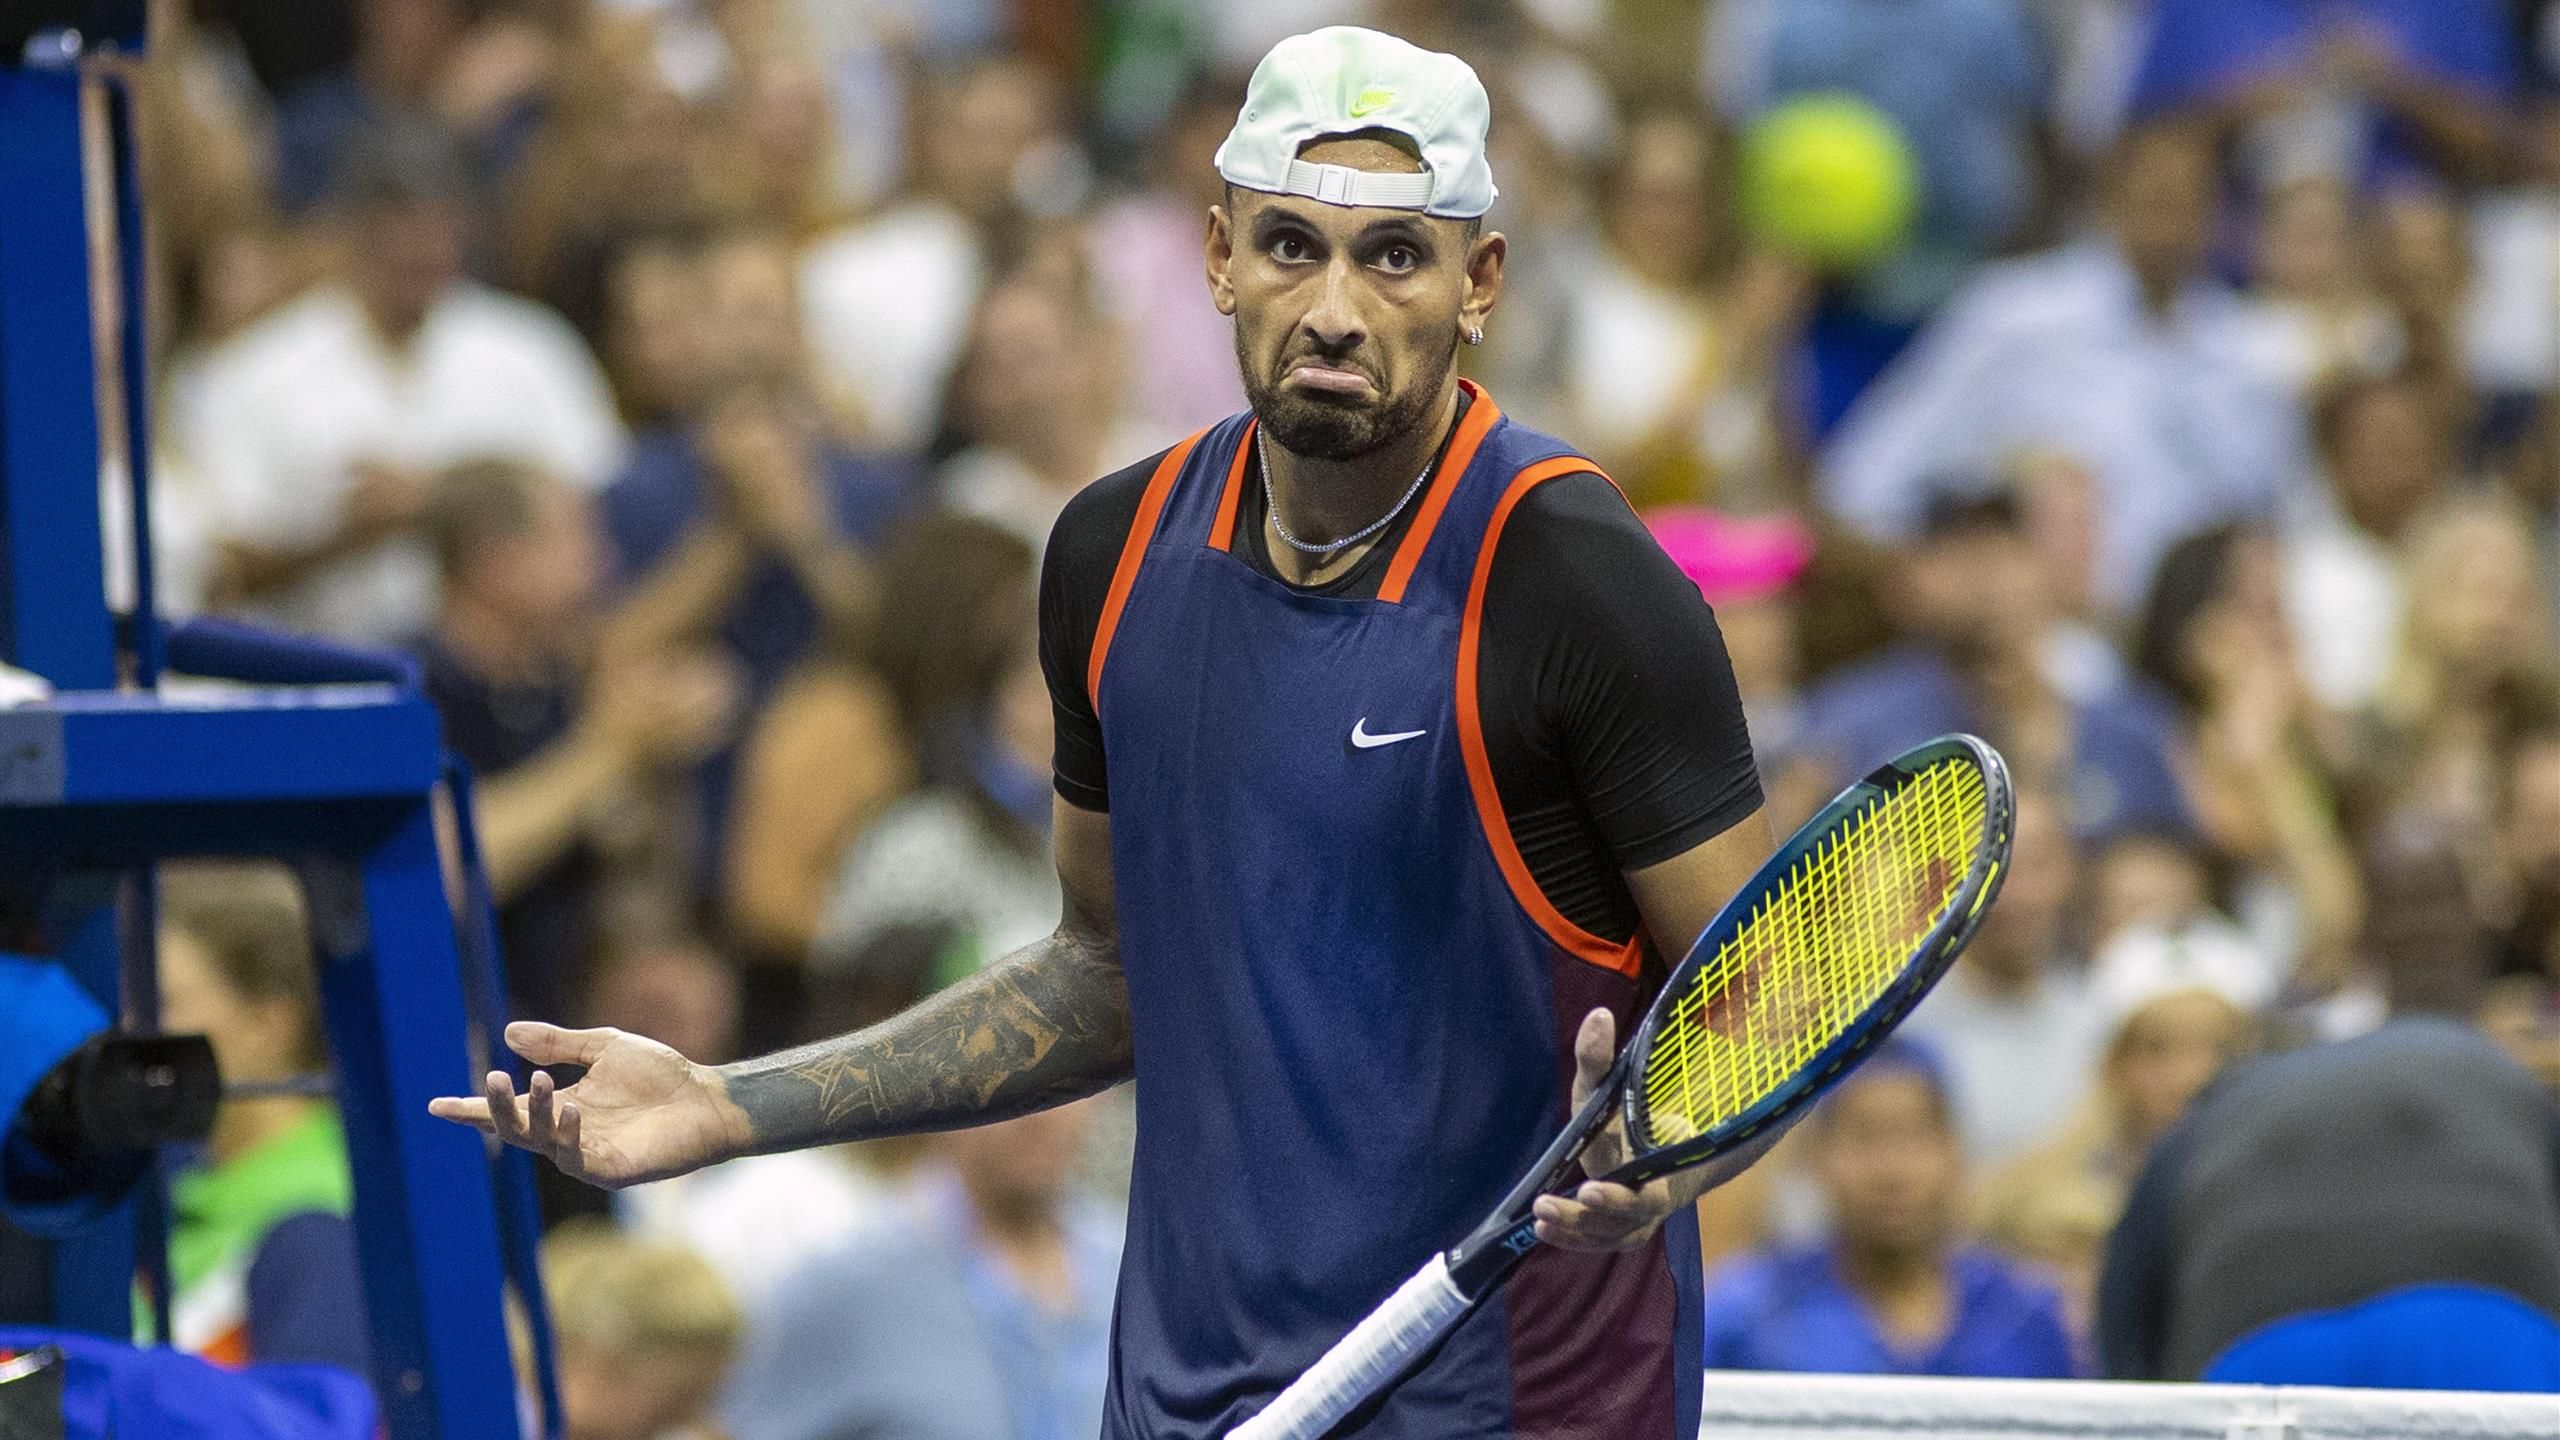 US Open - John McEnroe says Nick Kyrgios retiring is not impossible, adds he has one of the great serves in history